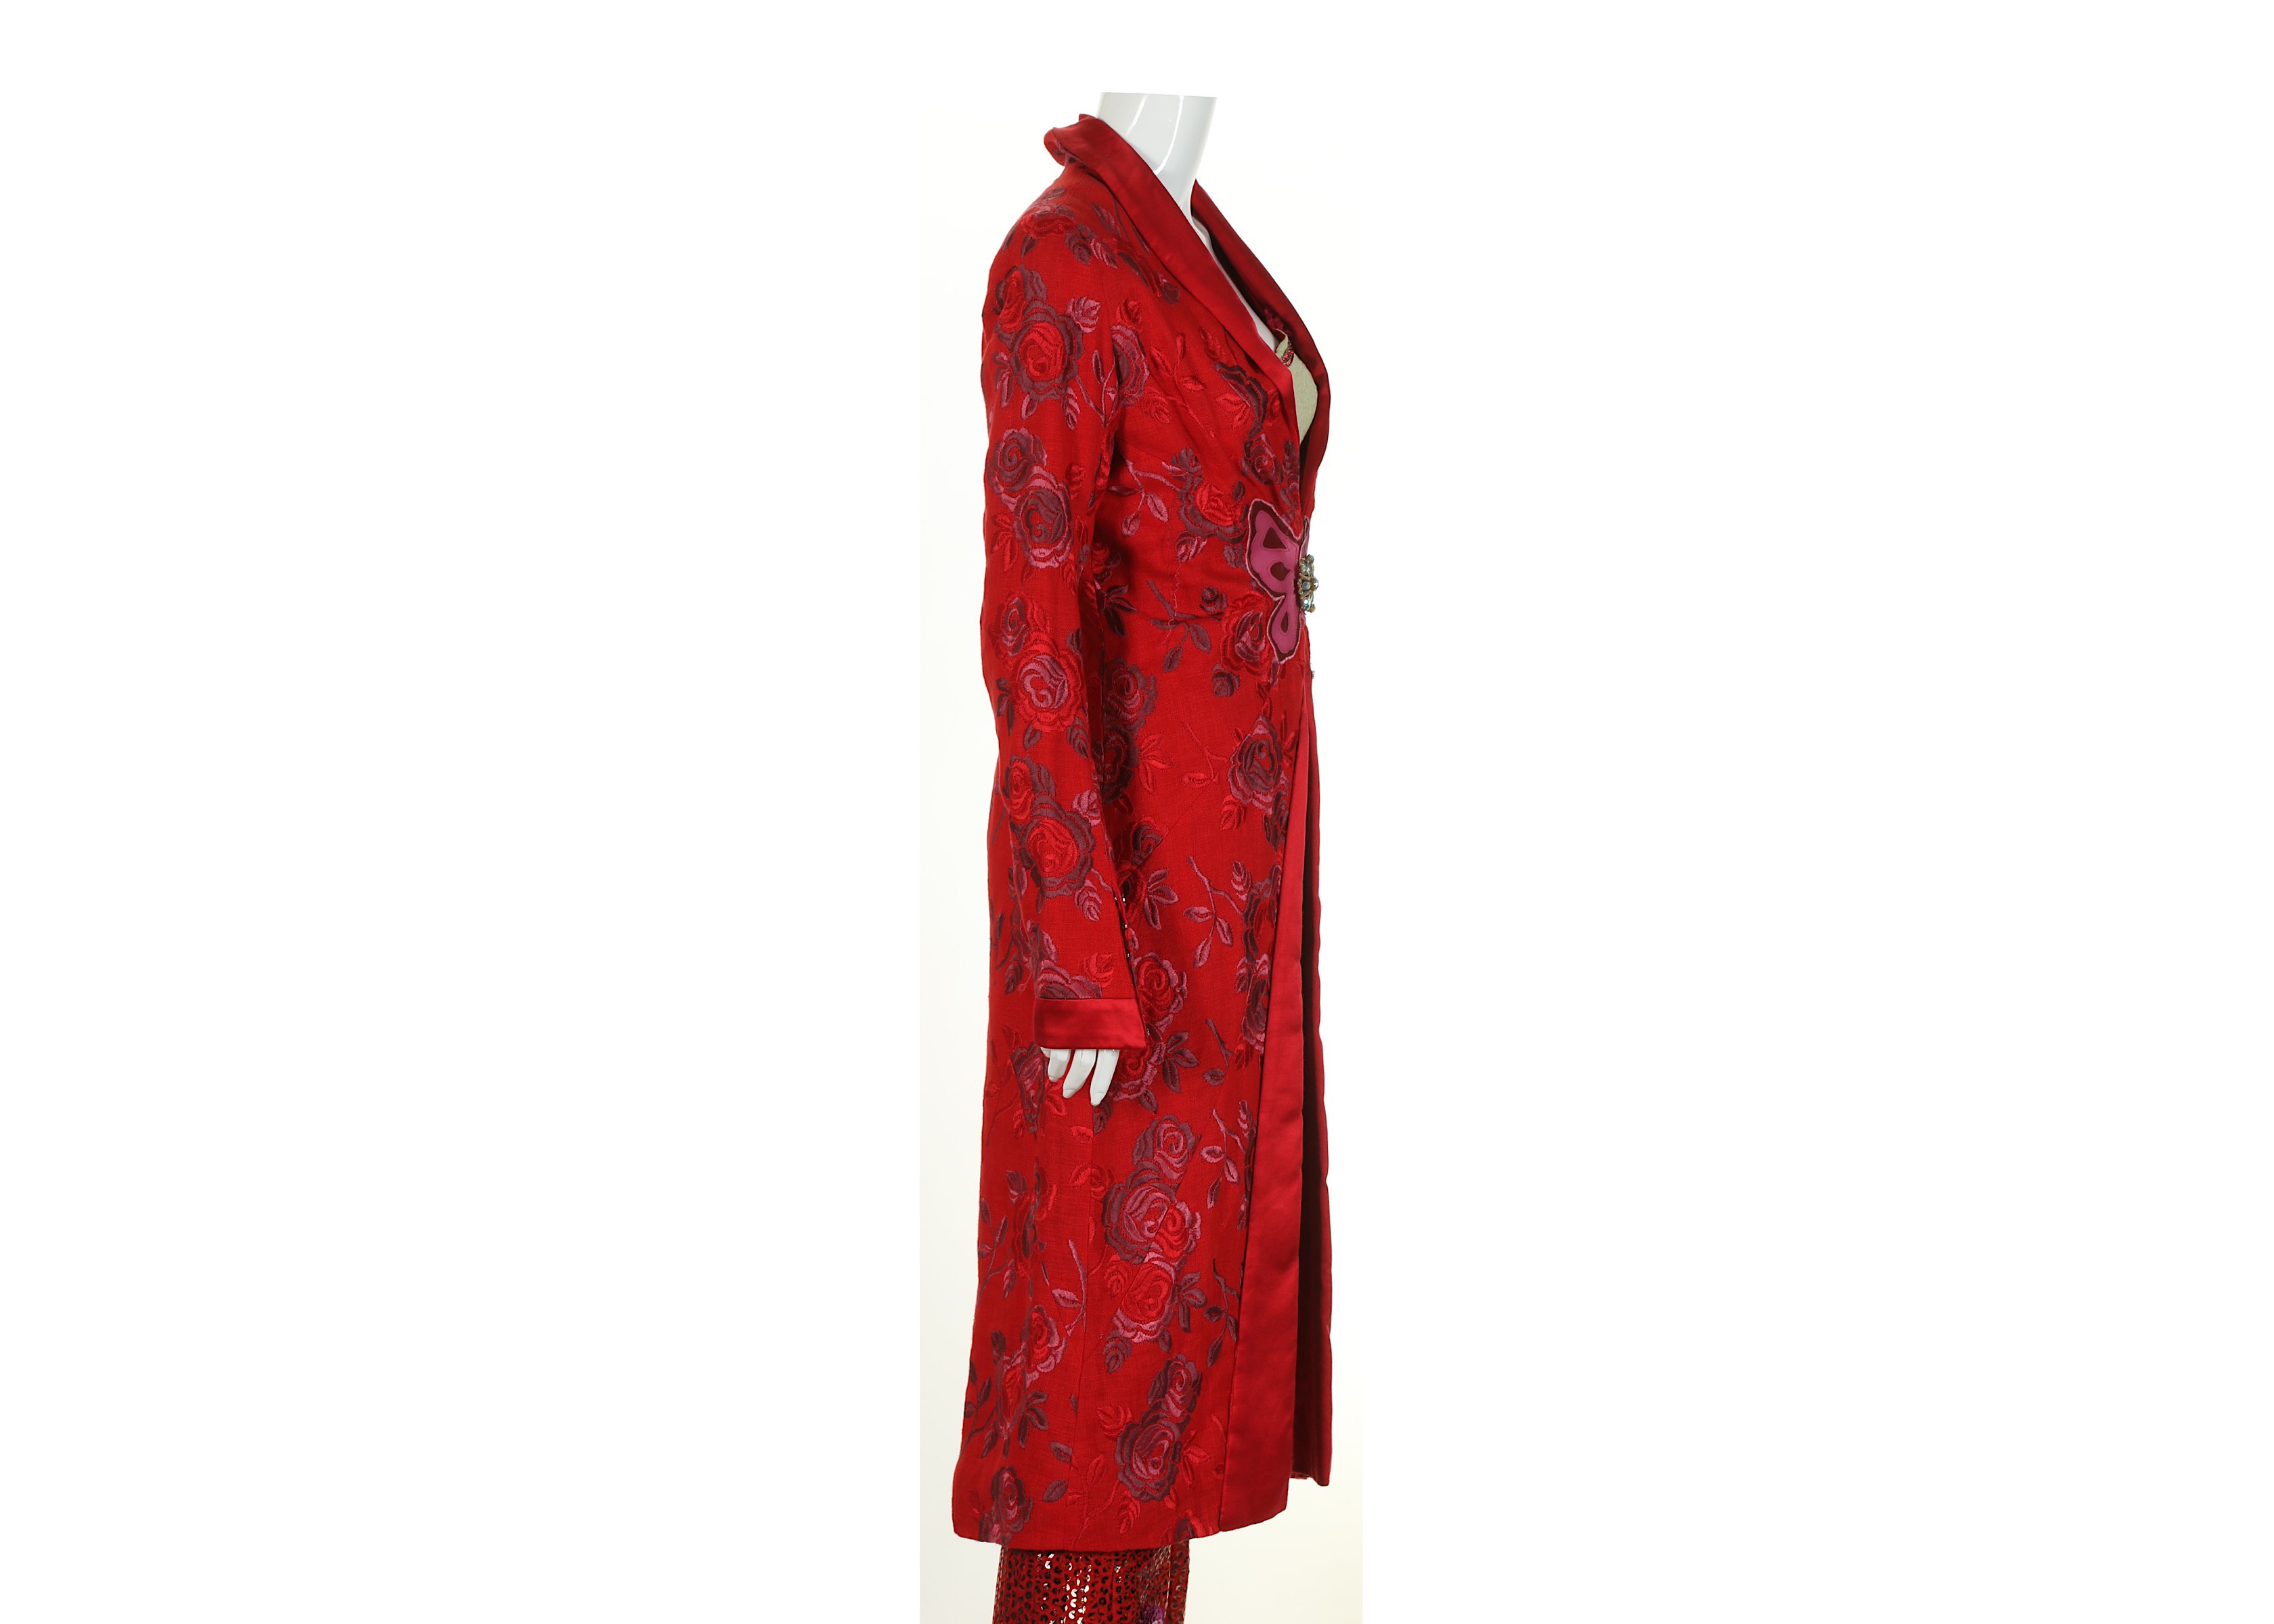 Voyage Blue and Red Ensembles, late 1990s, to include a red dress coat with leather butterfly to - Image 2 of 7